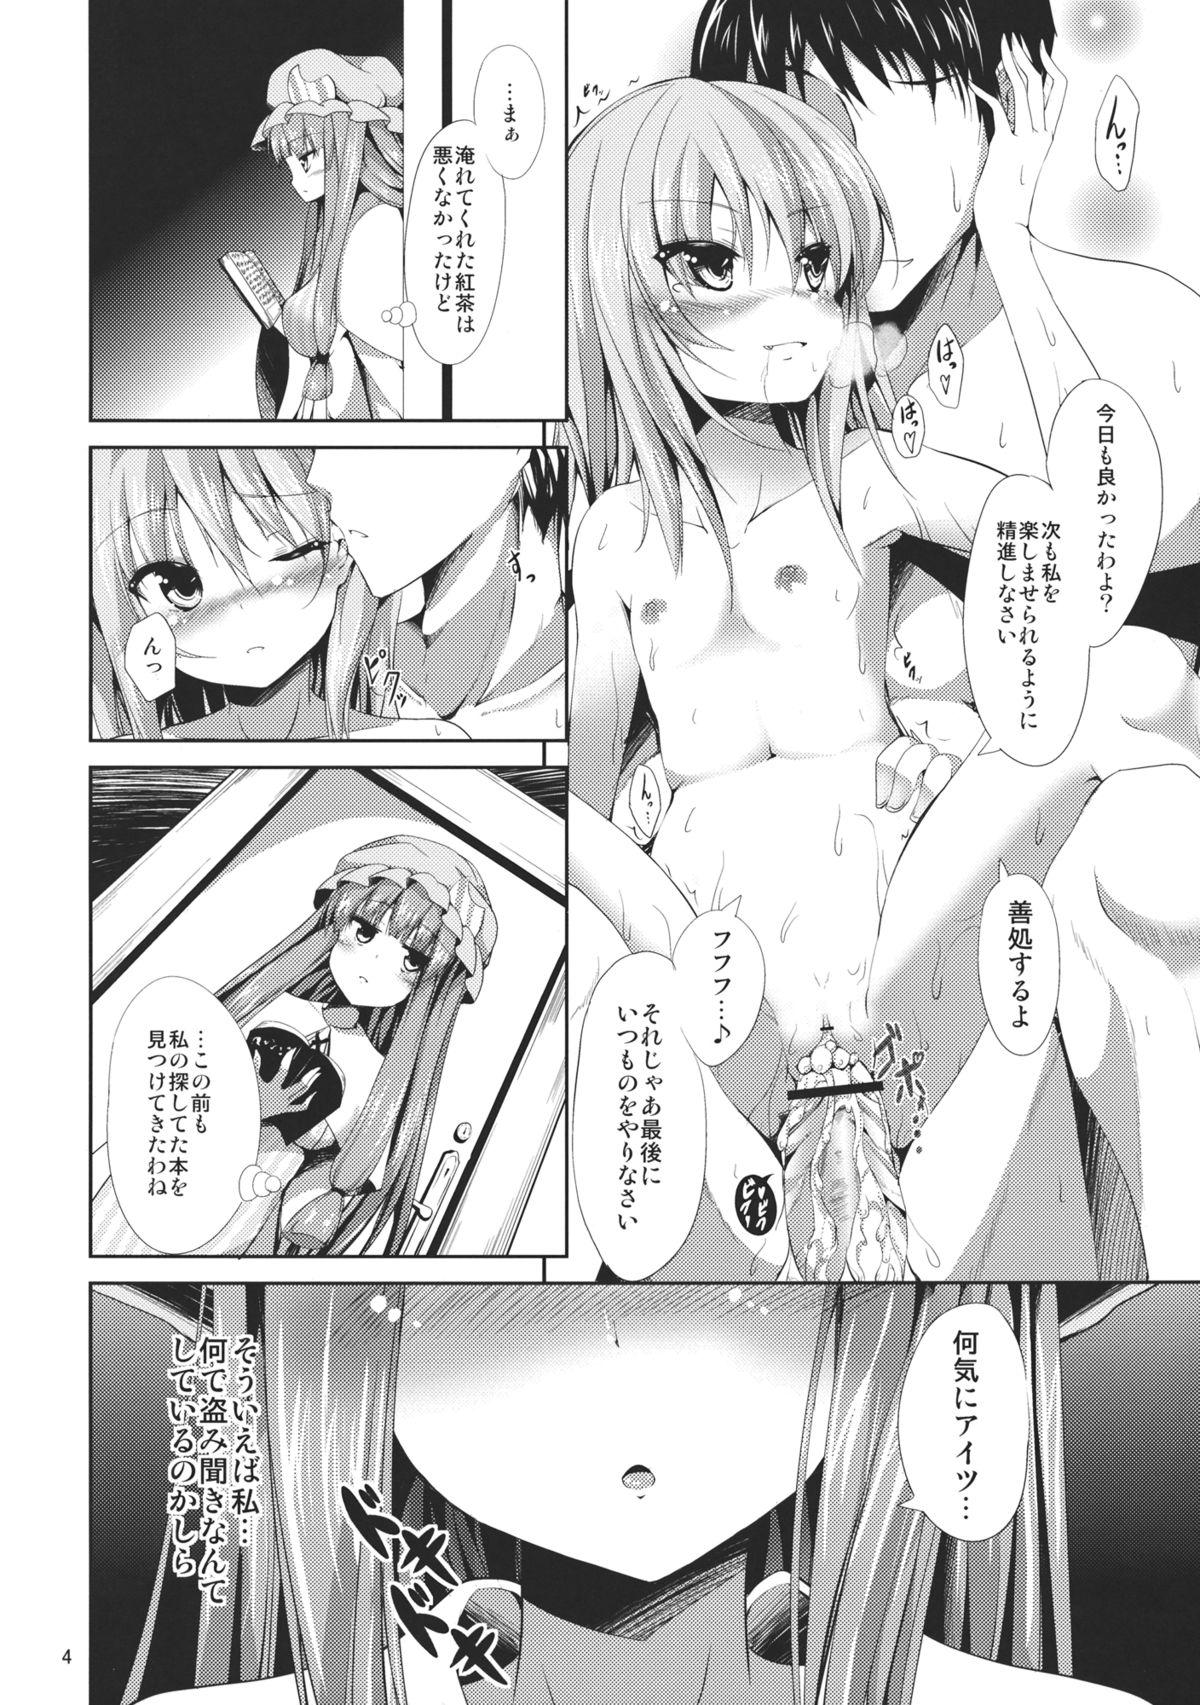 Moreno Sweet nothingS - Touhou project Rabo - Page 4